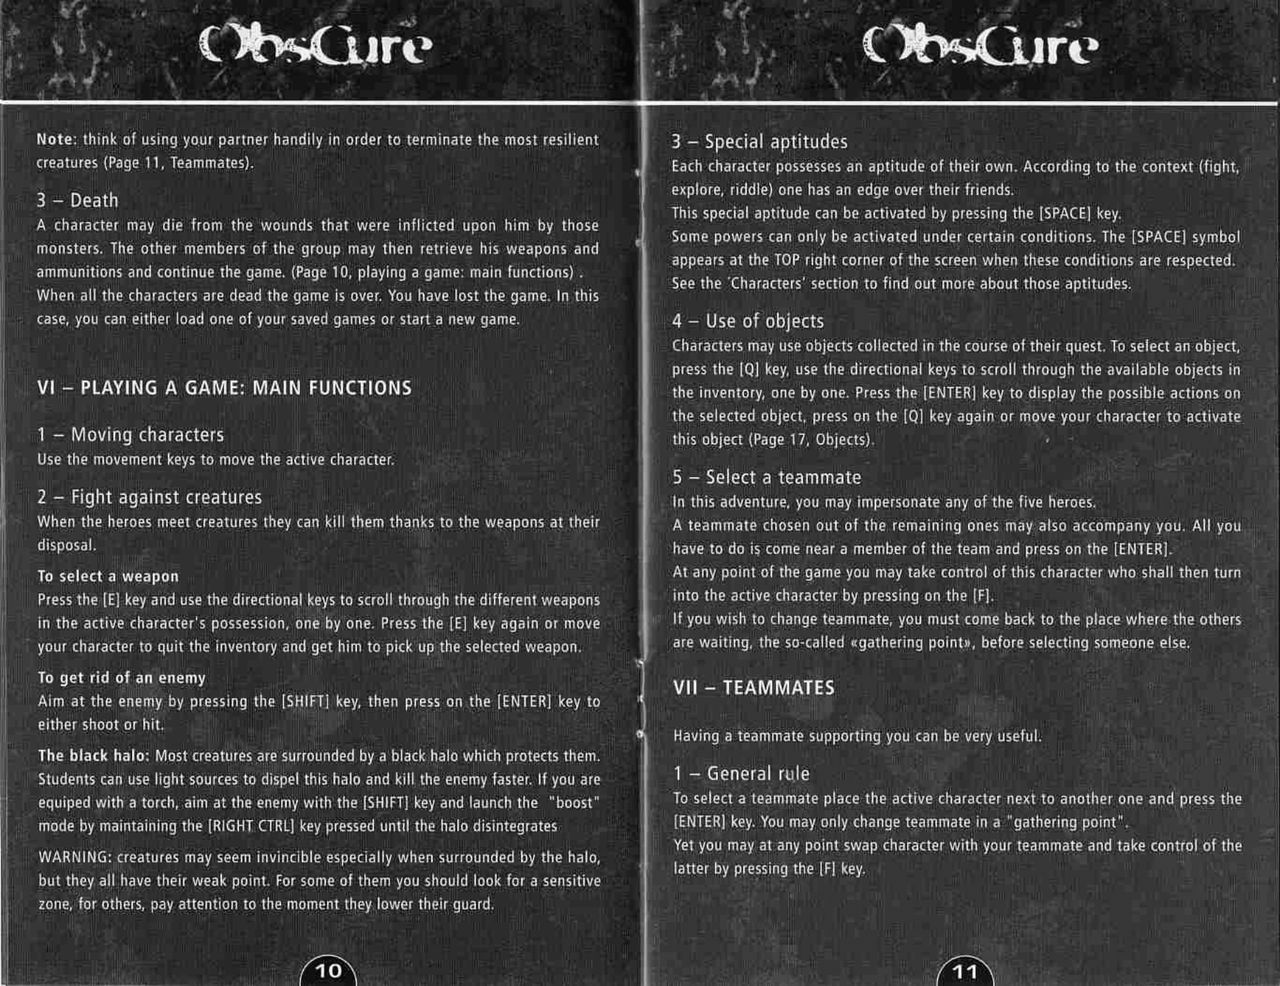 Obscure (PC (DOS/Windows)) Game Manual 6